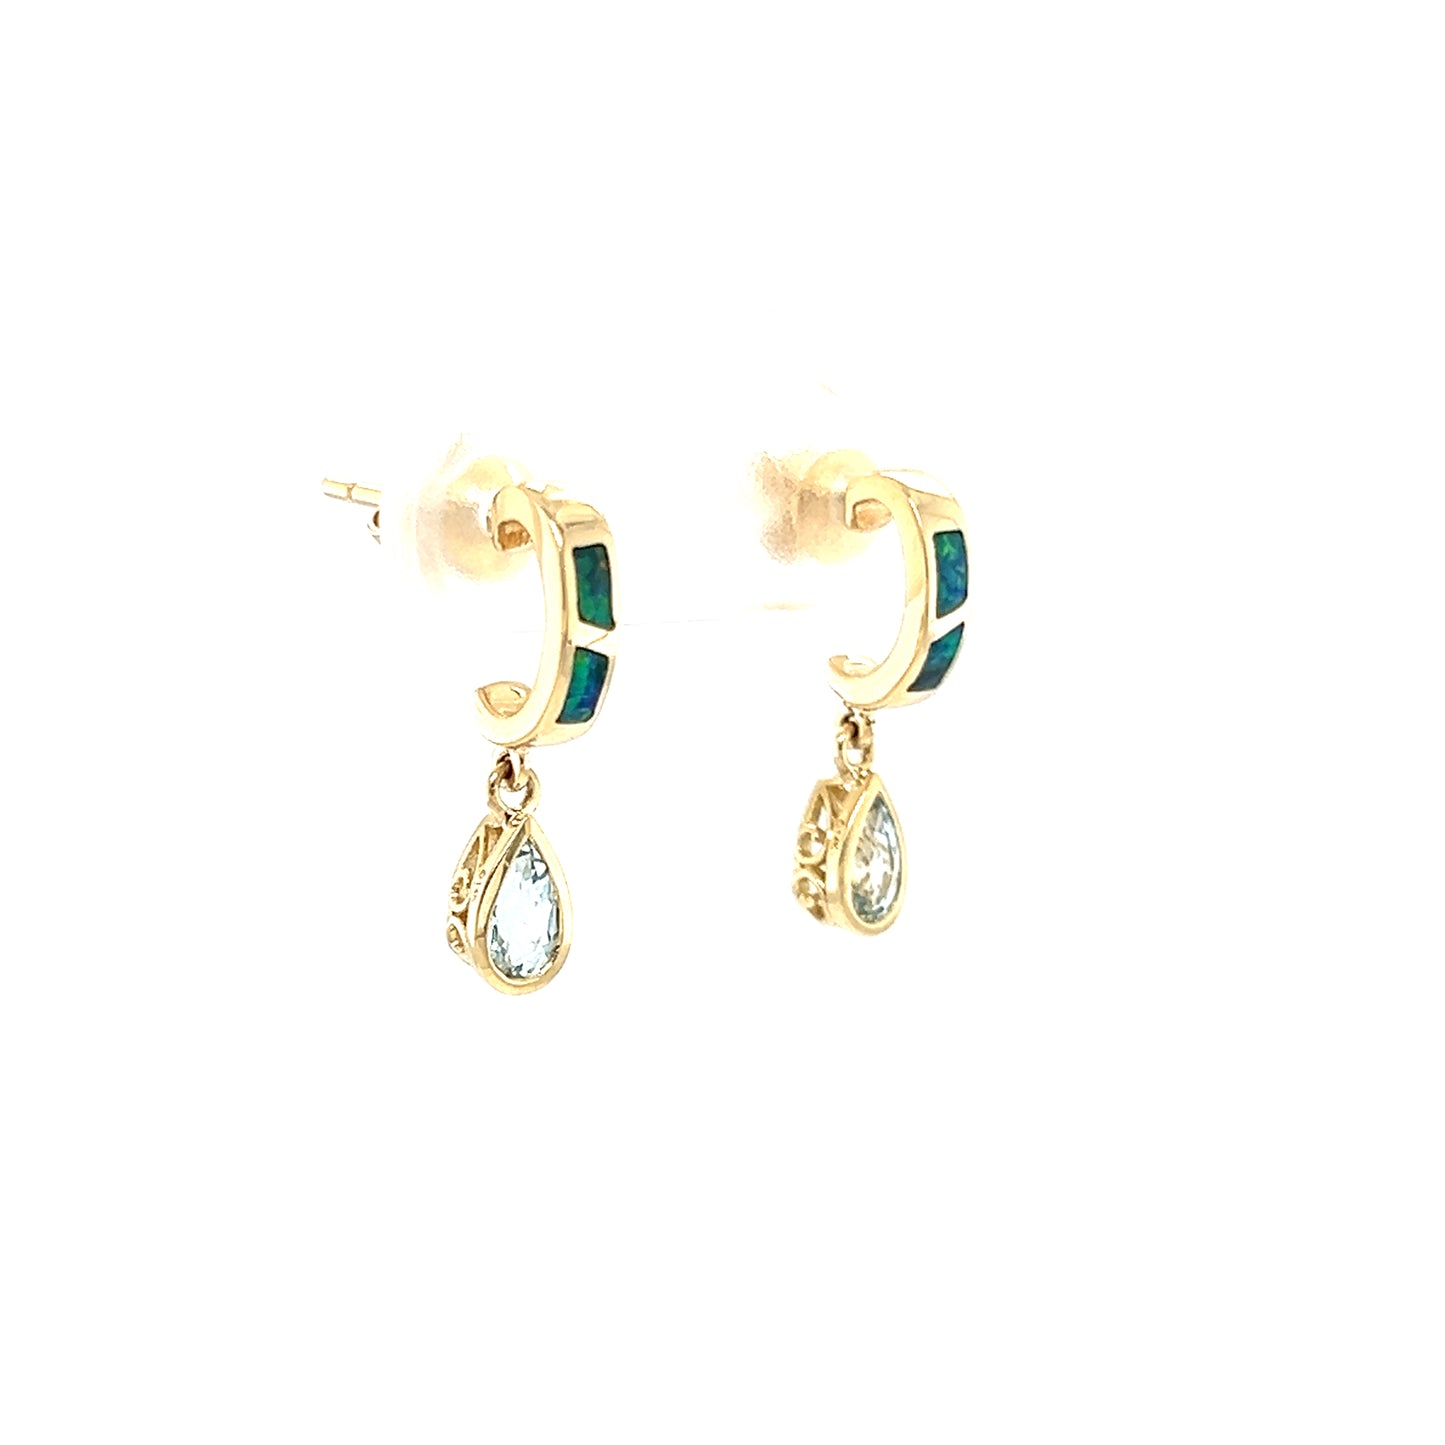 Black Opal C-Hoop Earrings with 0.51ctw of Aquamarine in 14K Yellow Gold Left Side View